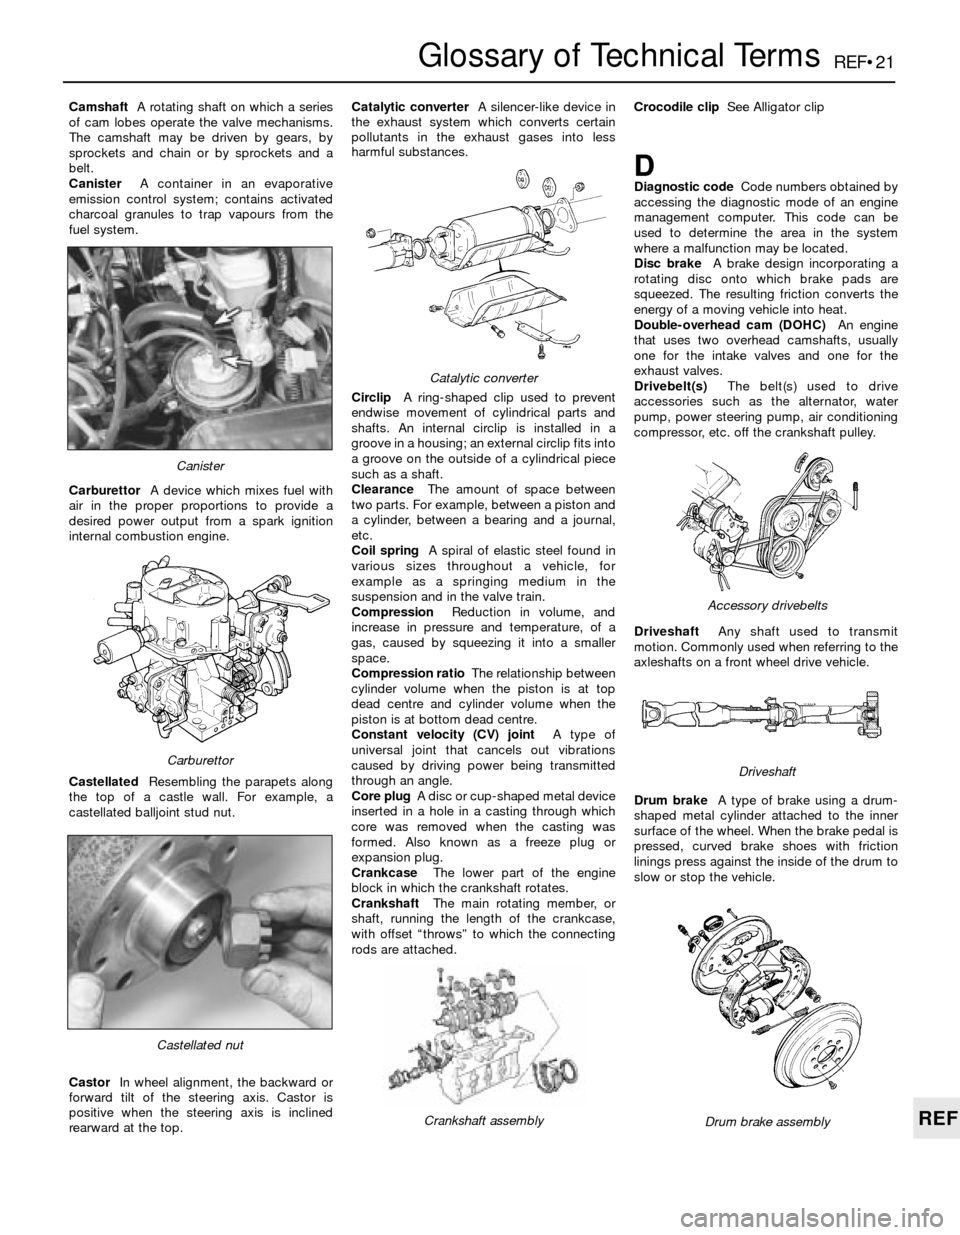 BMW 3 SERIES 1988 E30 Workshop Manual REF•21
REF
Glossary of Technical Terms
CamshaftA rotating shaft on which a series
of cam lobes operate the valve mechanisms.
The camshaft may be driven by gears, by
sprockets and chain or by sprocke